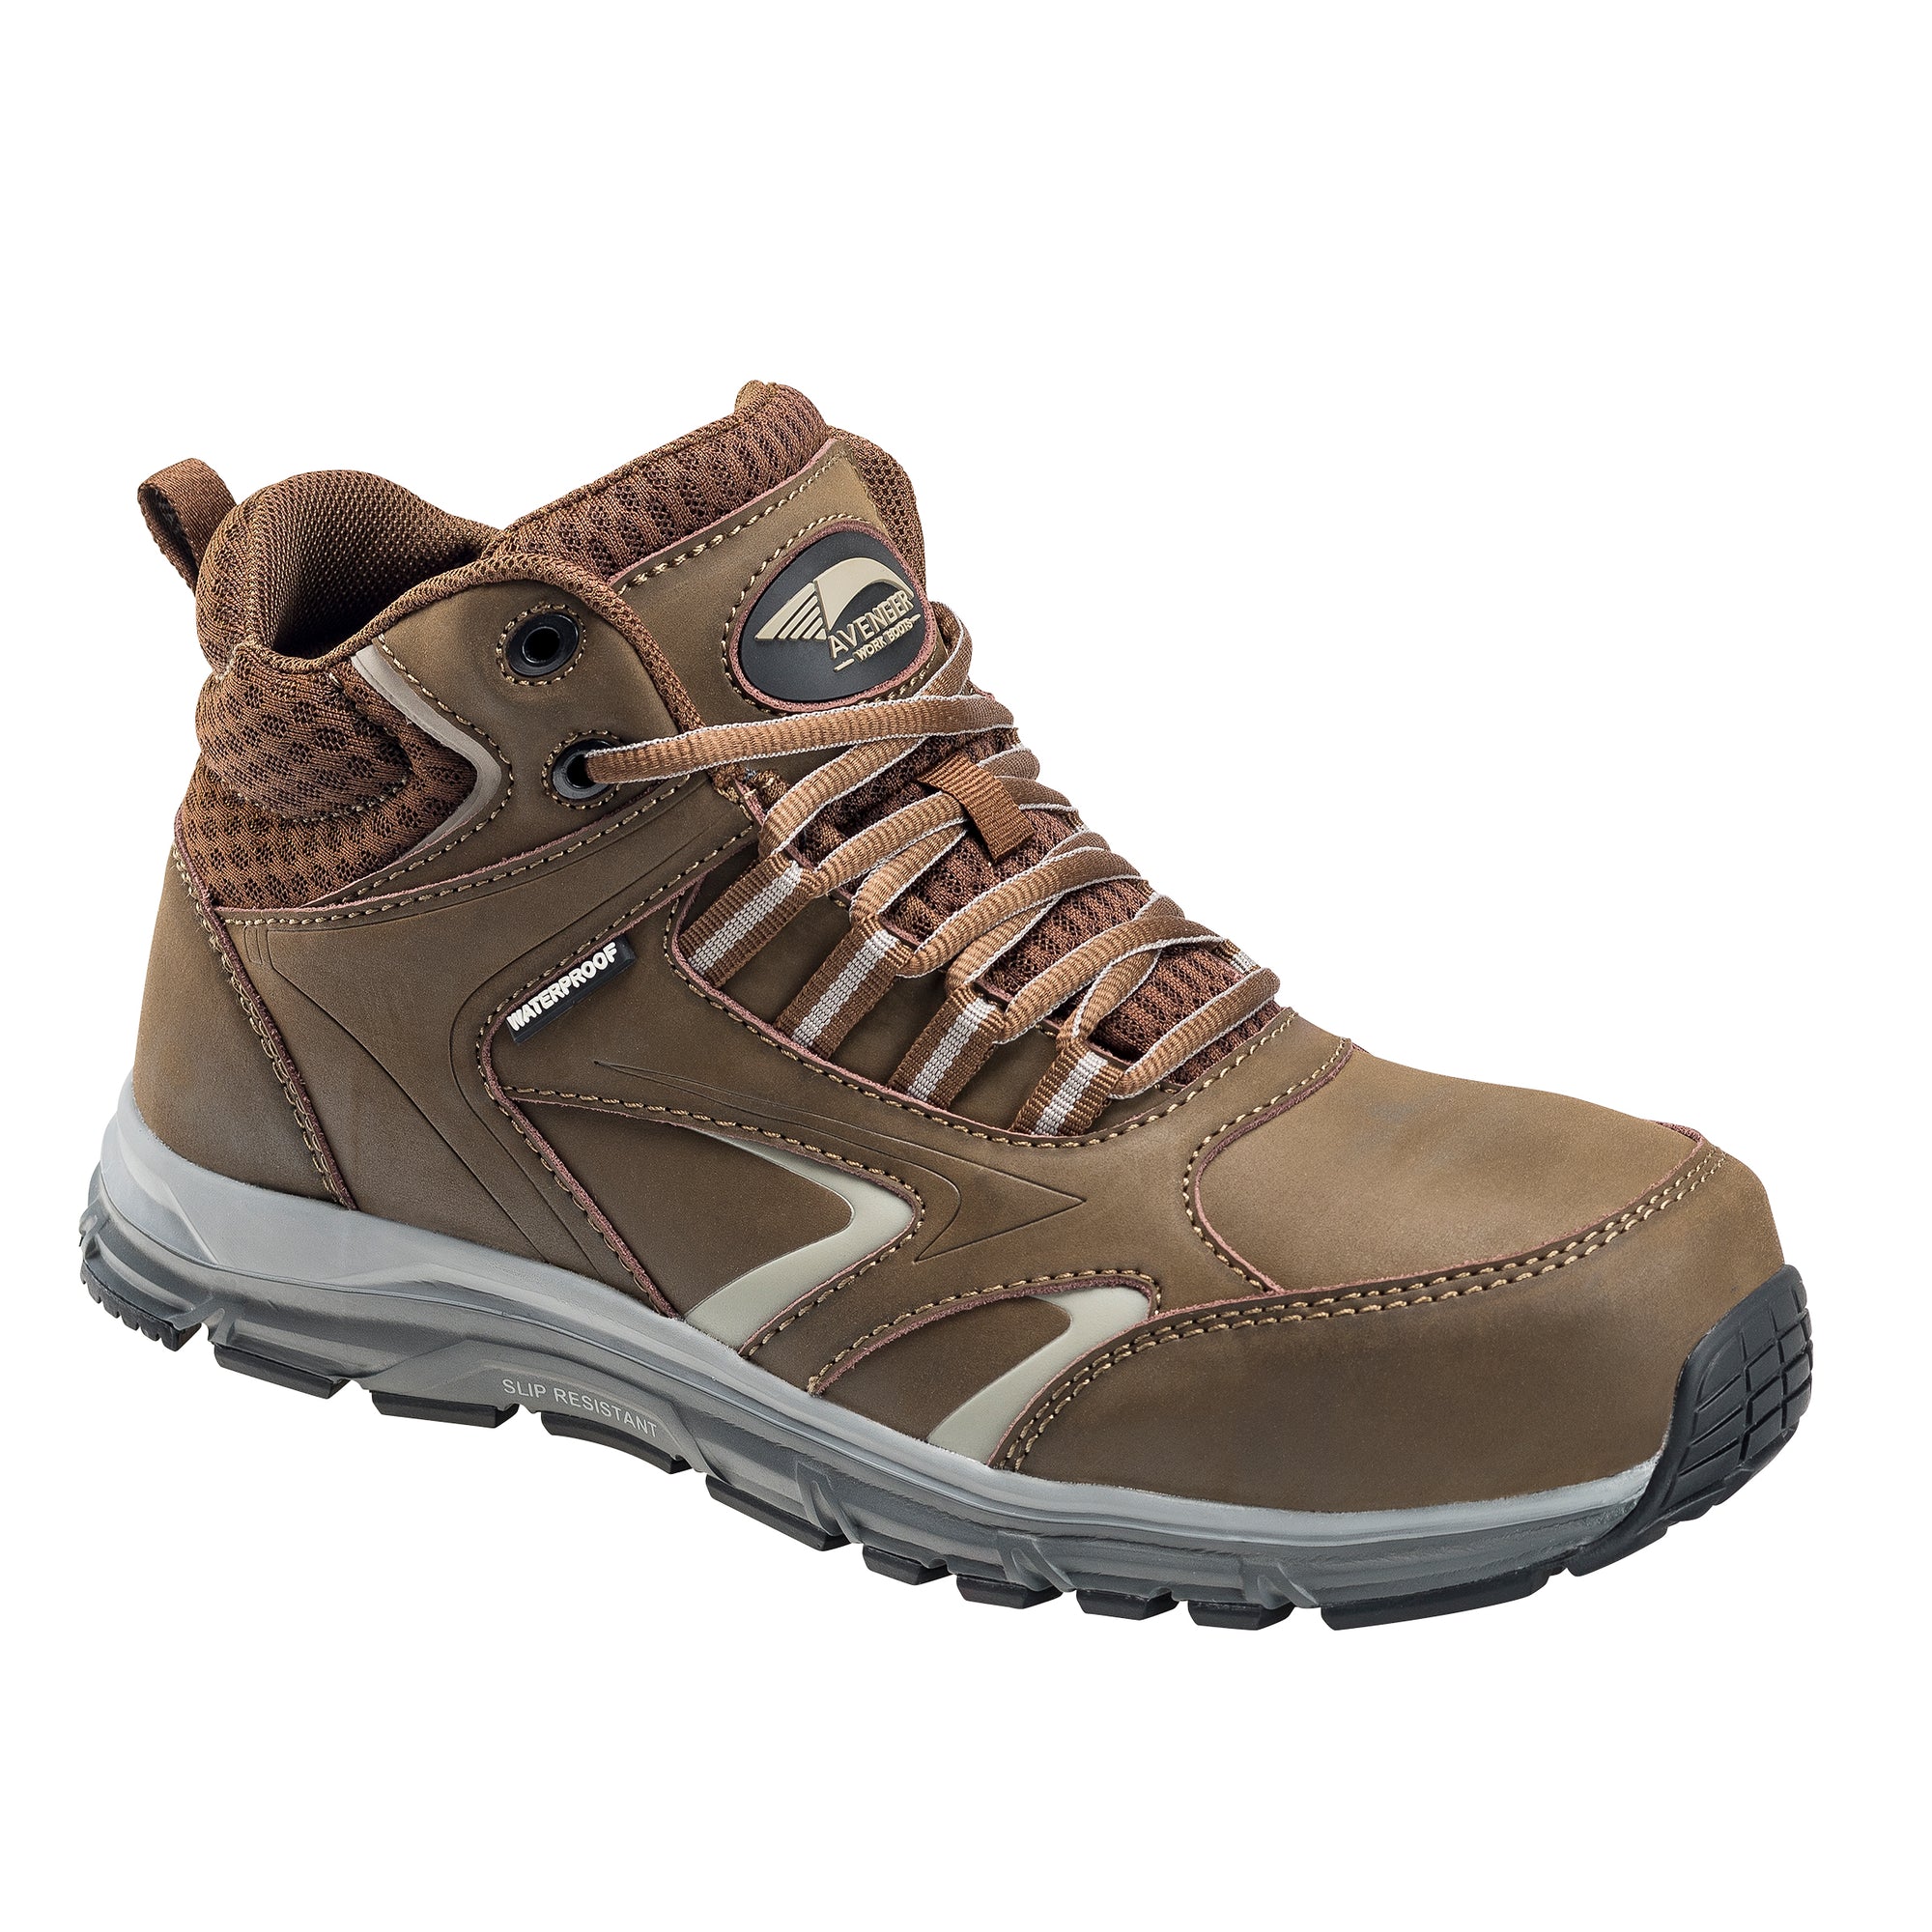 Thresher Brown Alloy Toe EH WP Work Shoe